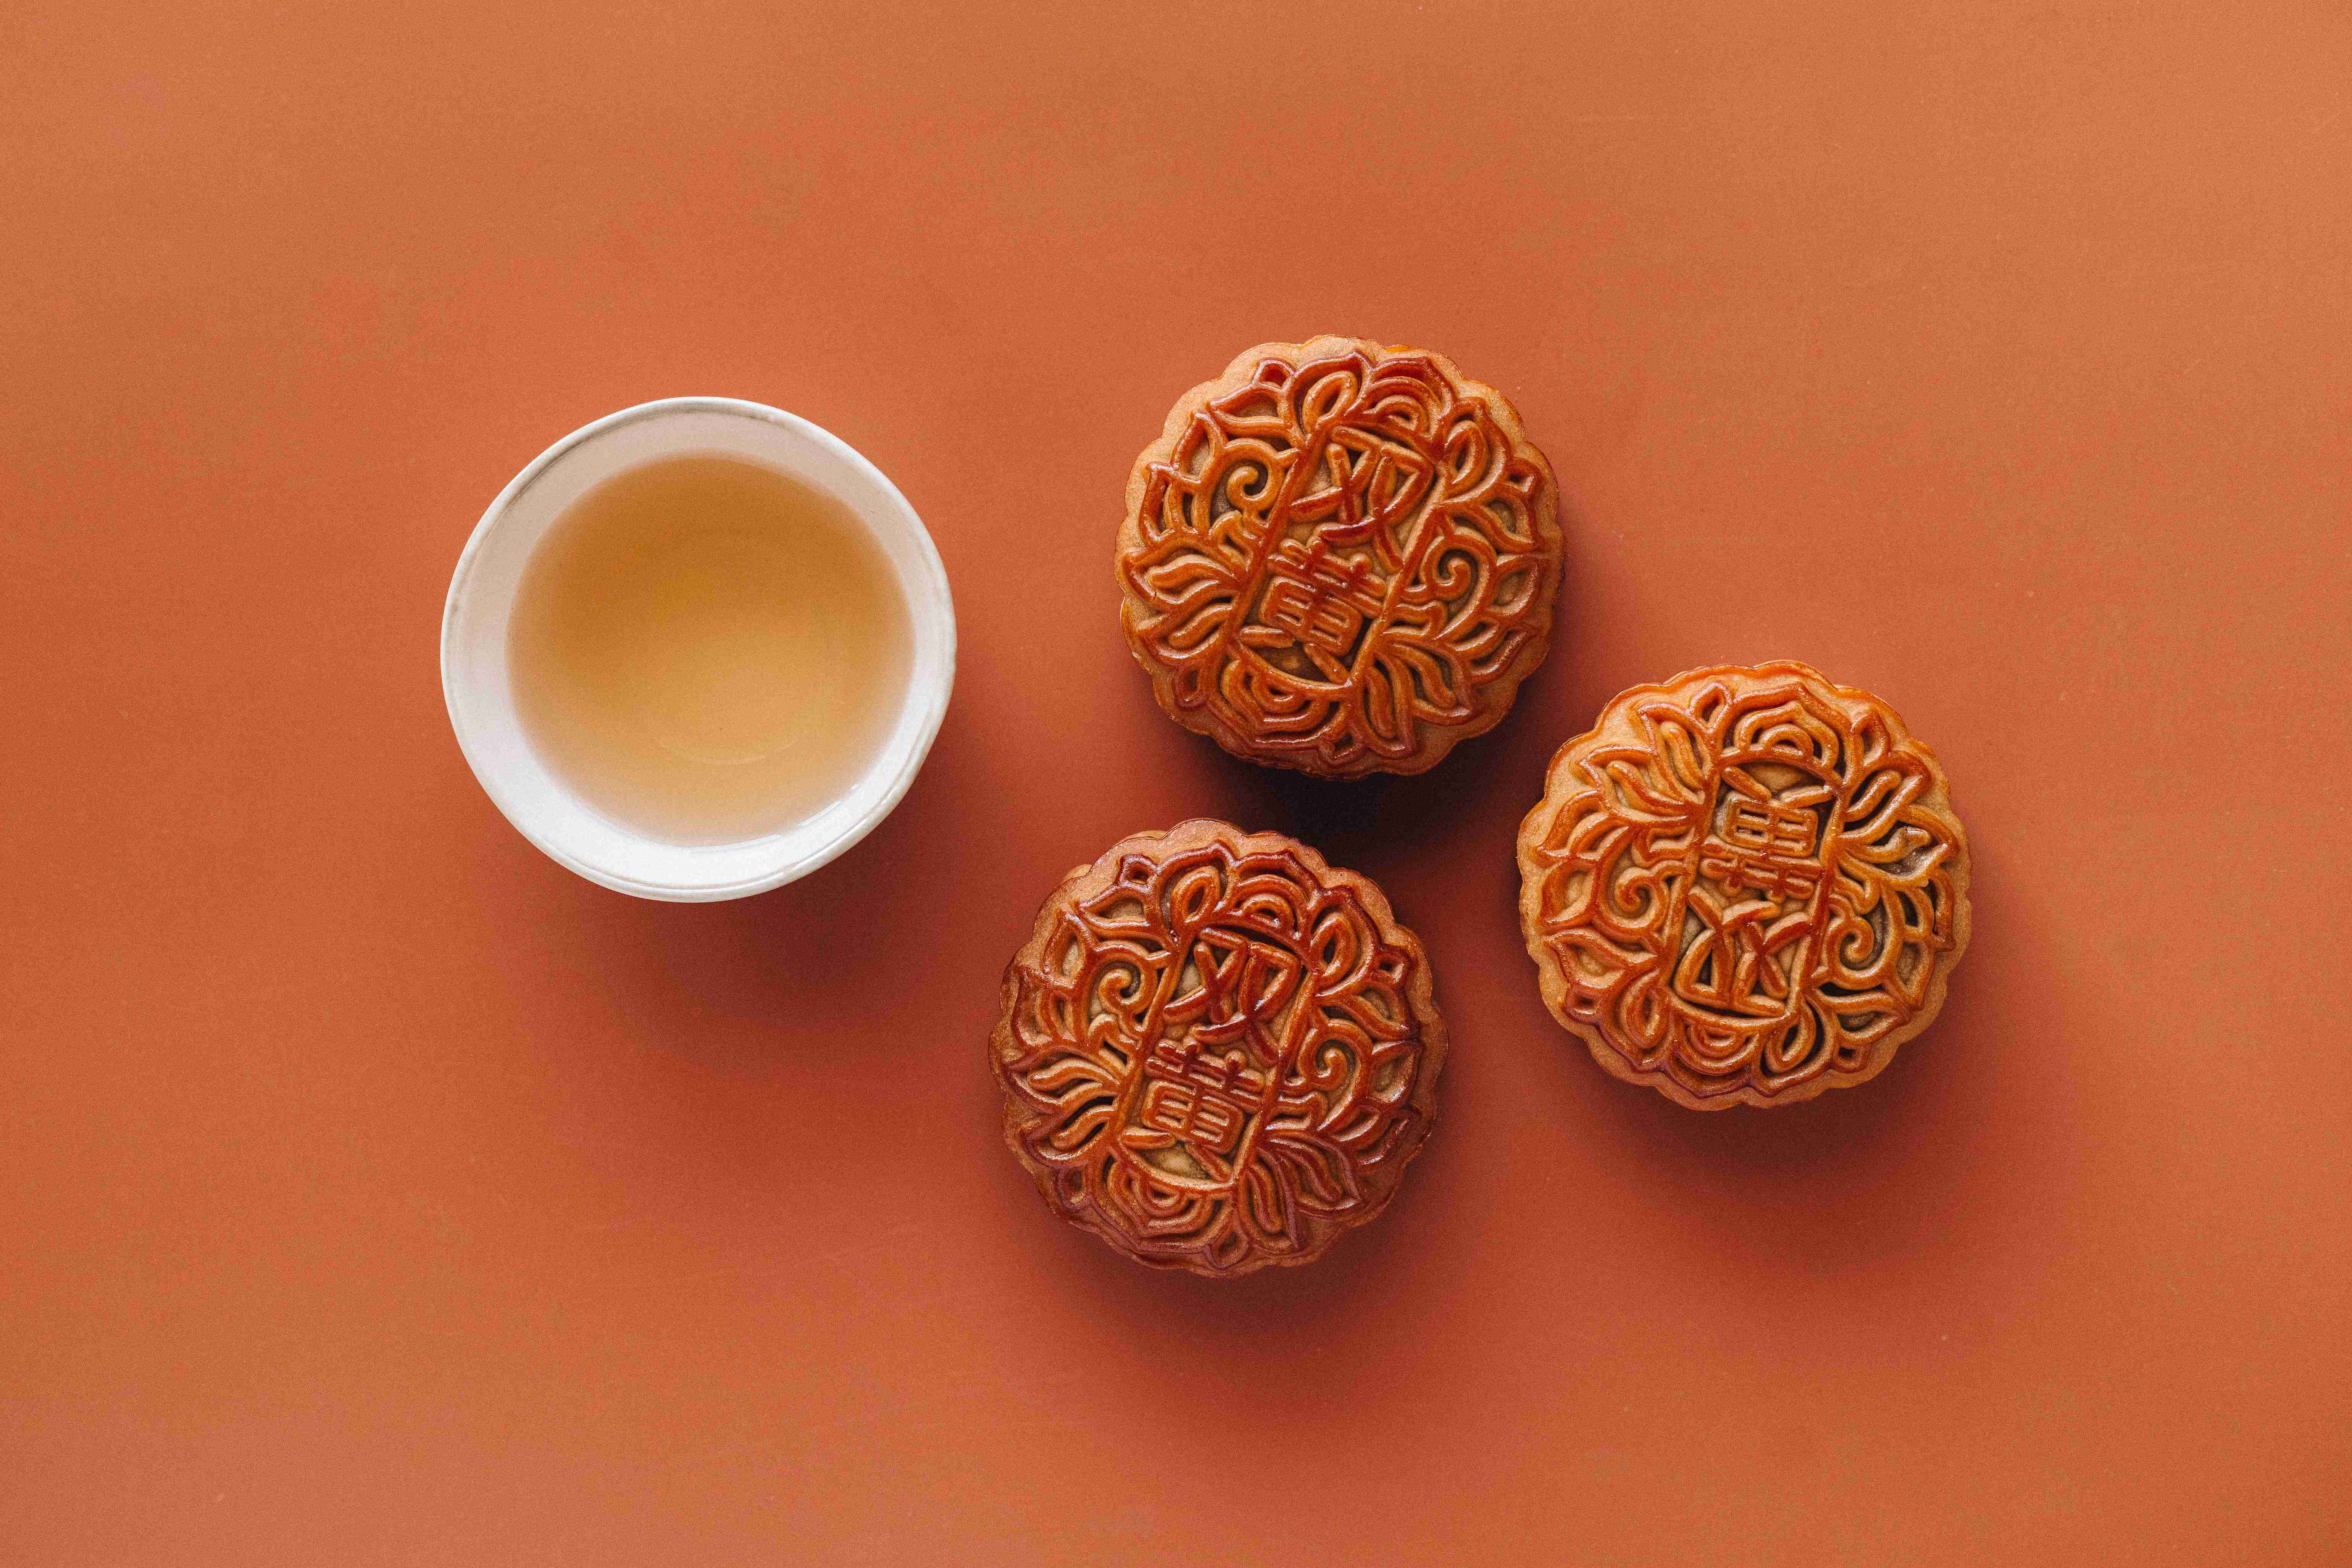 Mooncakes are the delicacy that the festival's name is based on